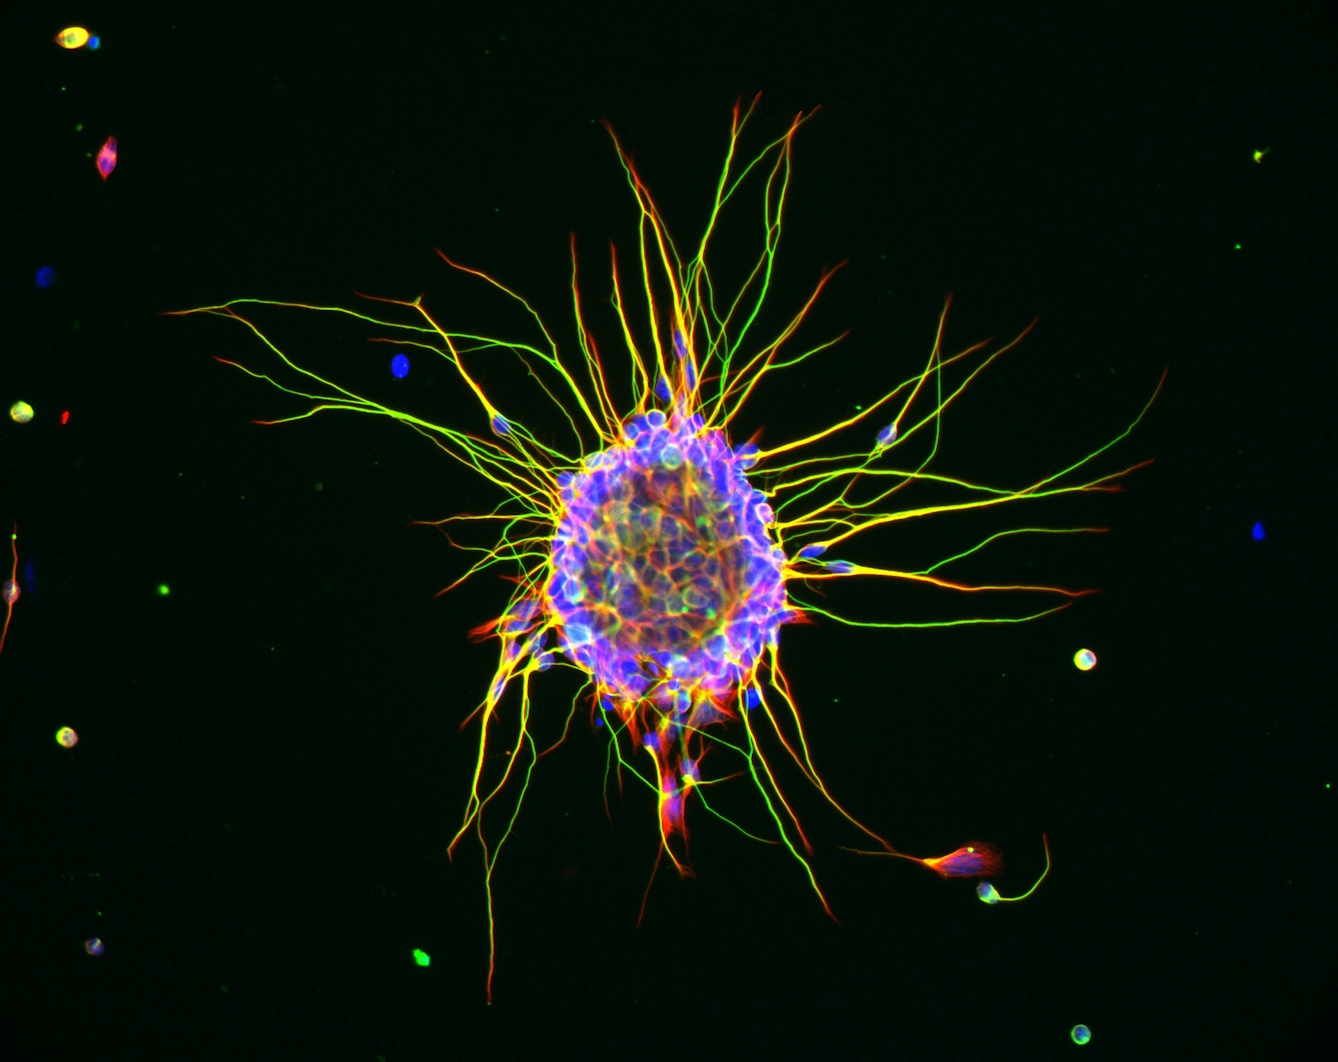 This fluorescence microscopy image shows a cluster of a special type of nerve cells, called cerebellar granule cells, growing in culture. These cells naturally gather together. When placed in a culture dish covered in a particular protein, they start sending out long projections (yellow/green) as they would in the developing brain. 